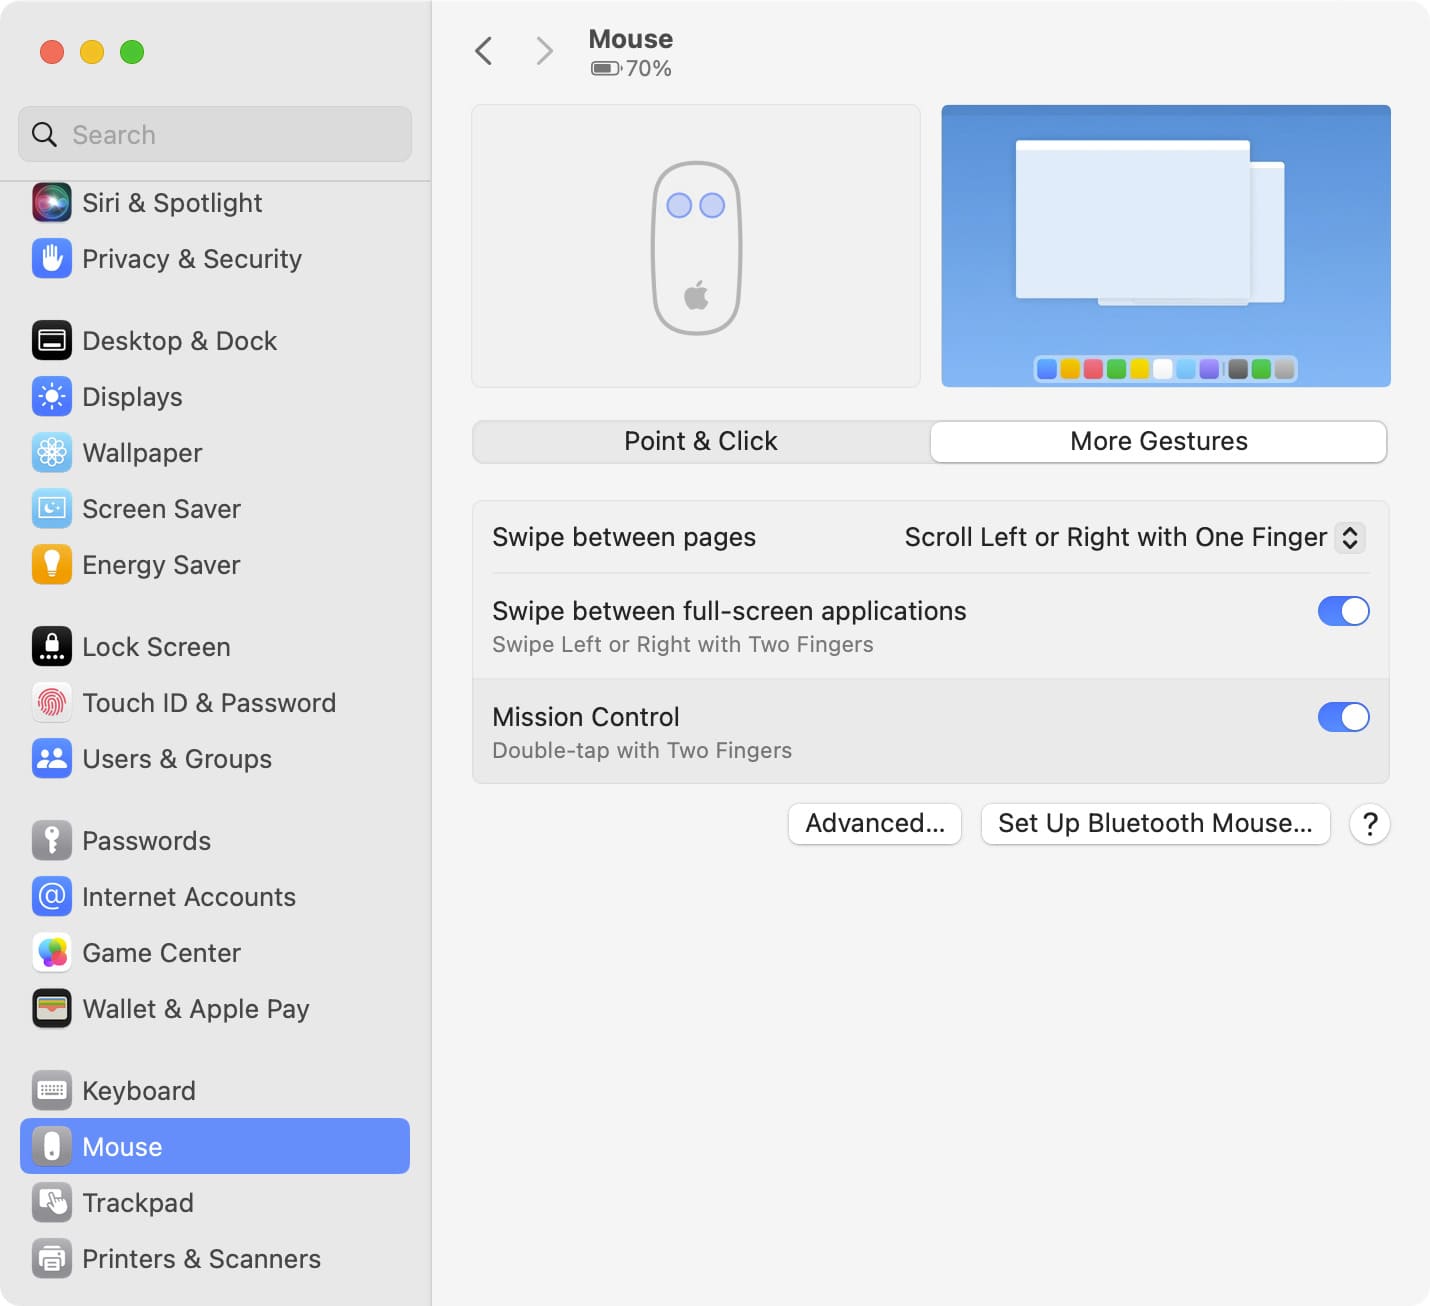 More Gestures in Mouse settings on Mac